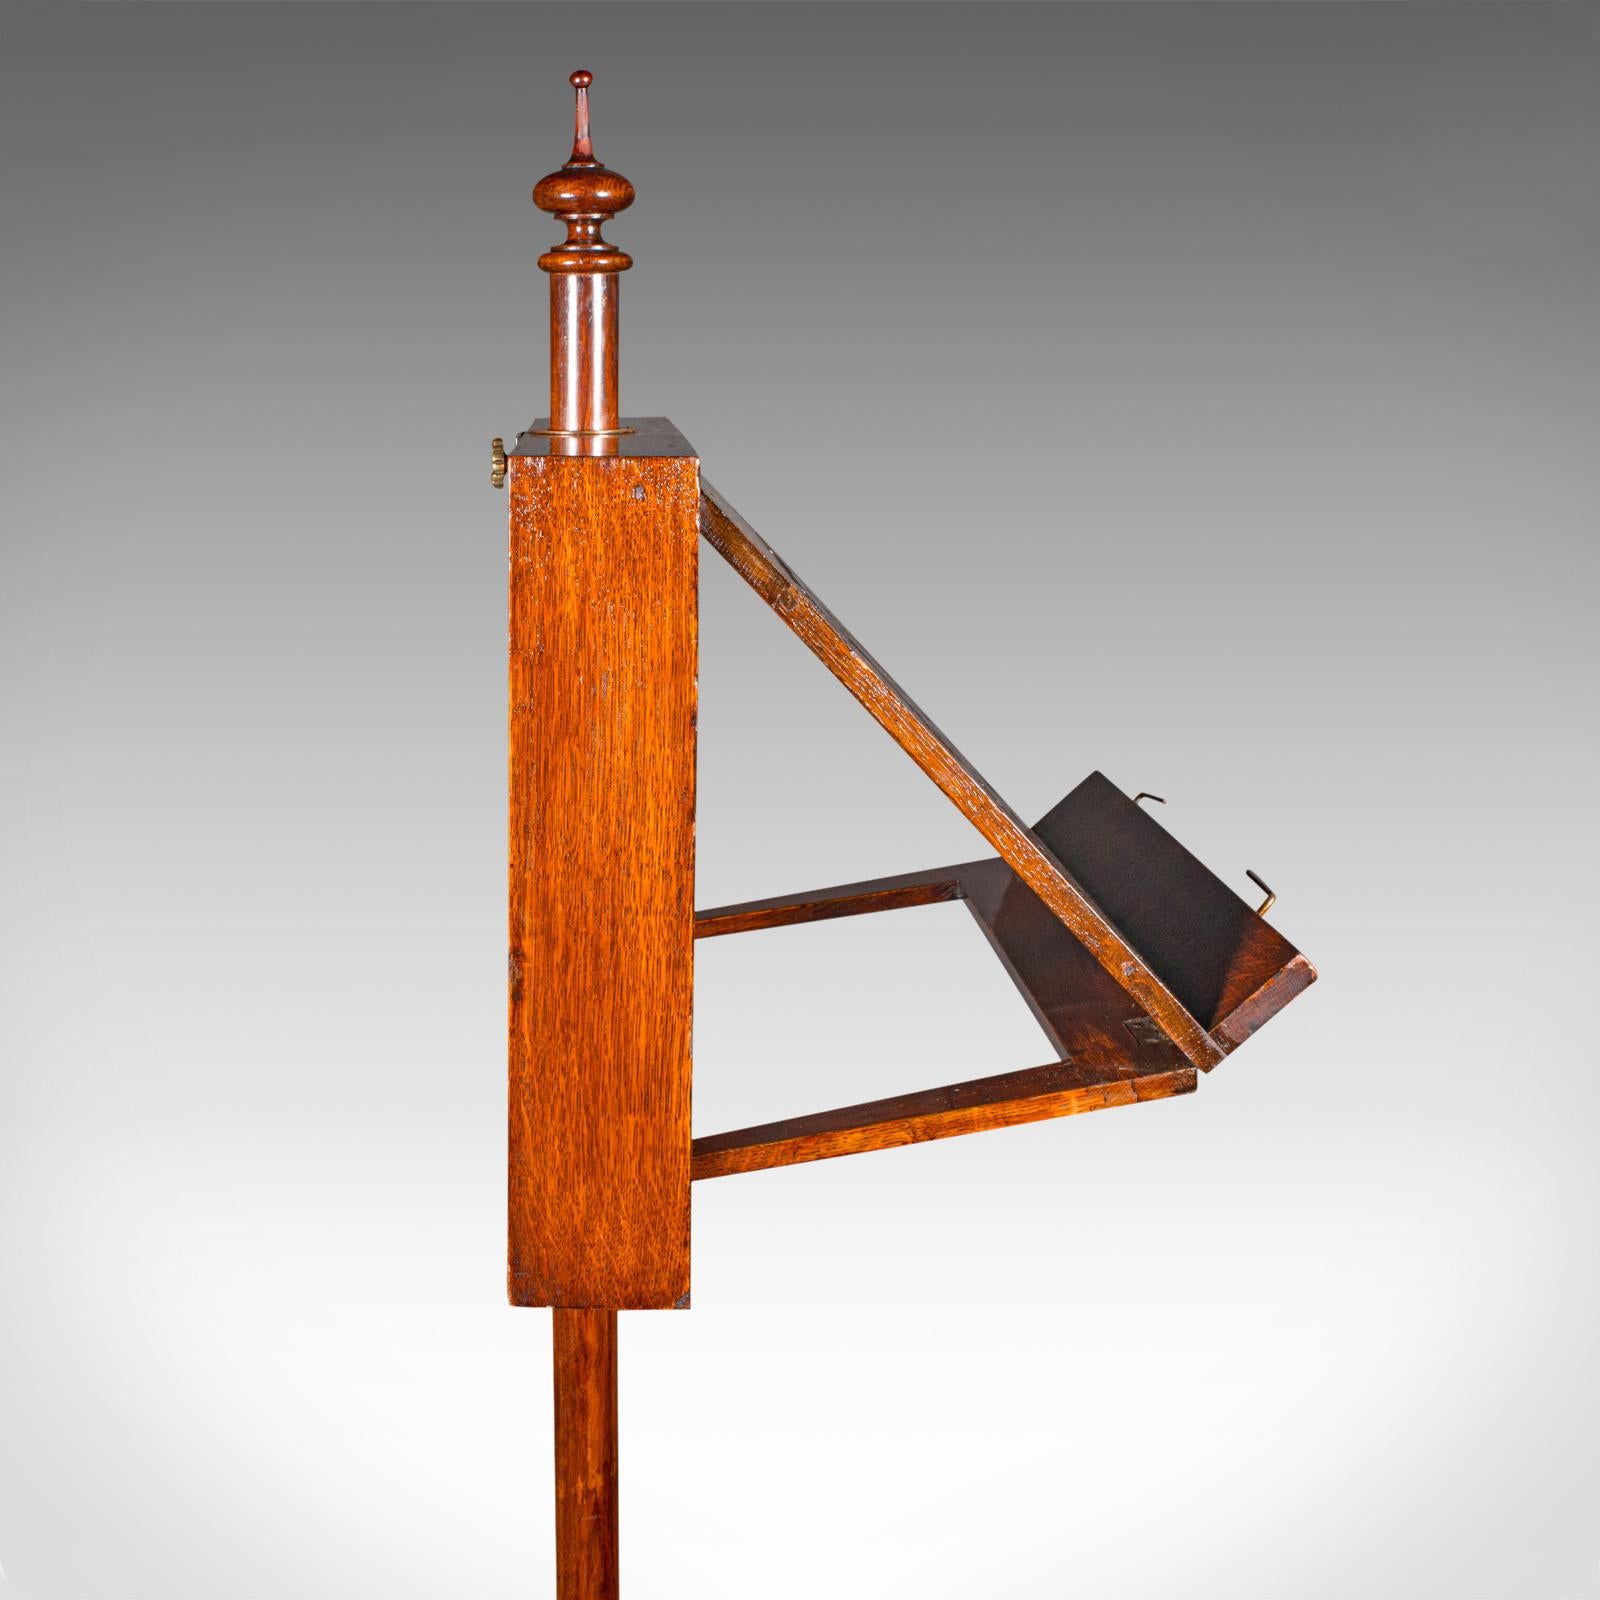 Tall Antique Music Stand, English, Oak, Adjustable Recital Rest, Victorian, 1880 For Sale 3